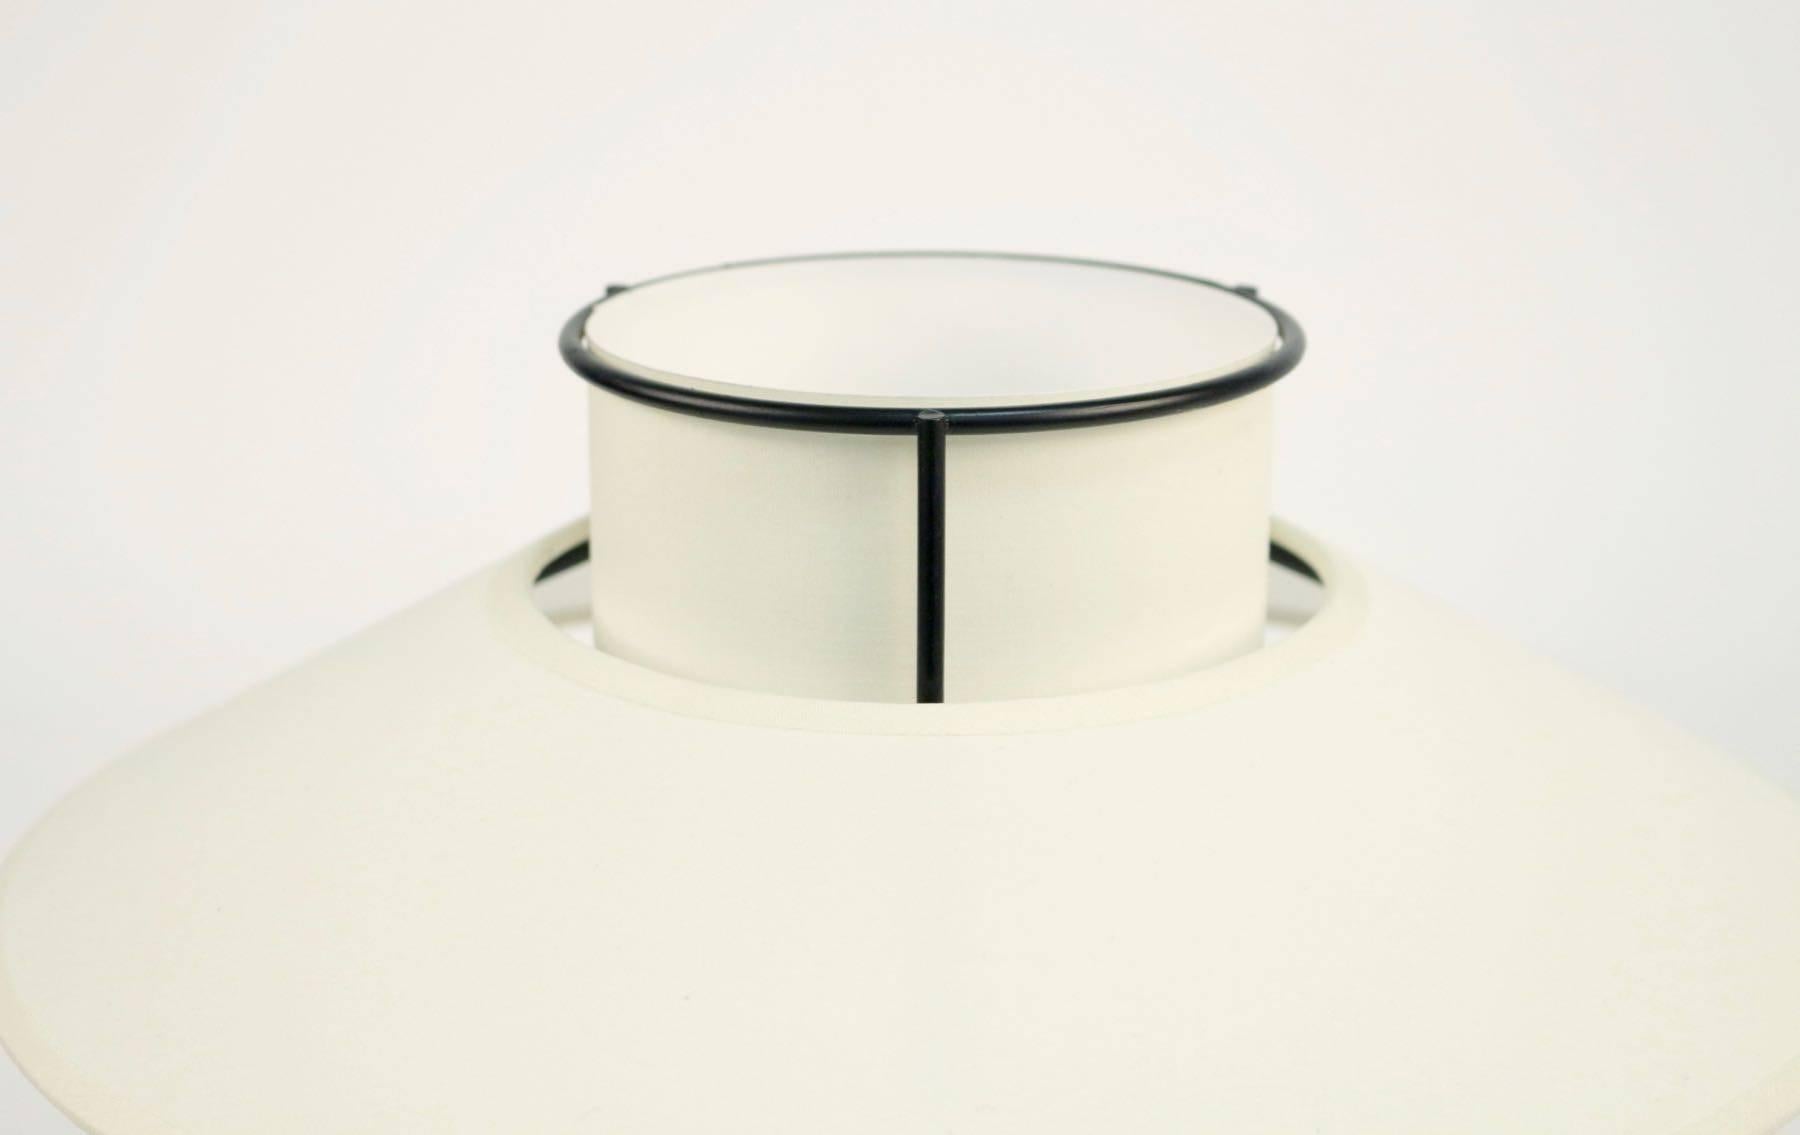 1950 Jacques Biny attributed modernist lantern table lamp
Made with black iron stem.
Handmade lampshade of white ivory cotton, granted to the original.
Minimalist and modernist design, design inspired by the Japanese lanterns.